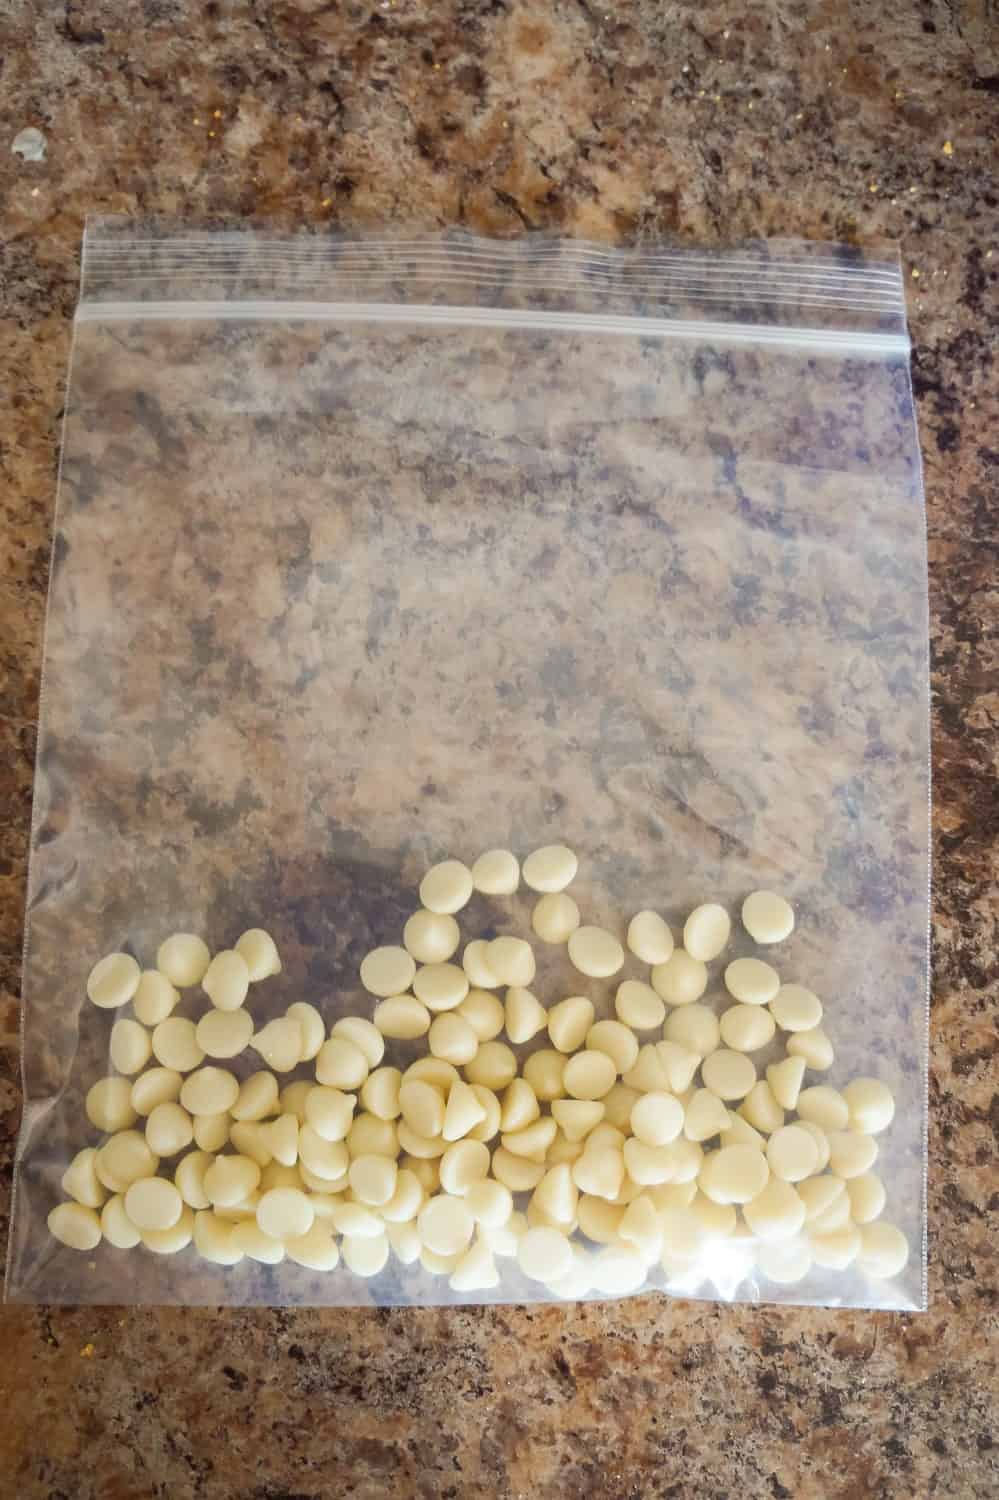 white chocolate baking chips in a ziploc bag